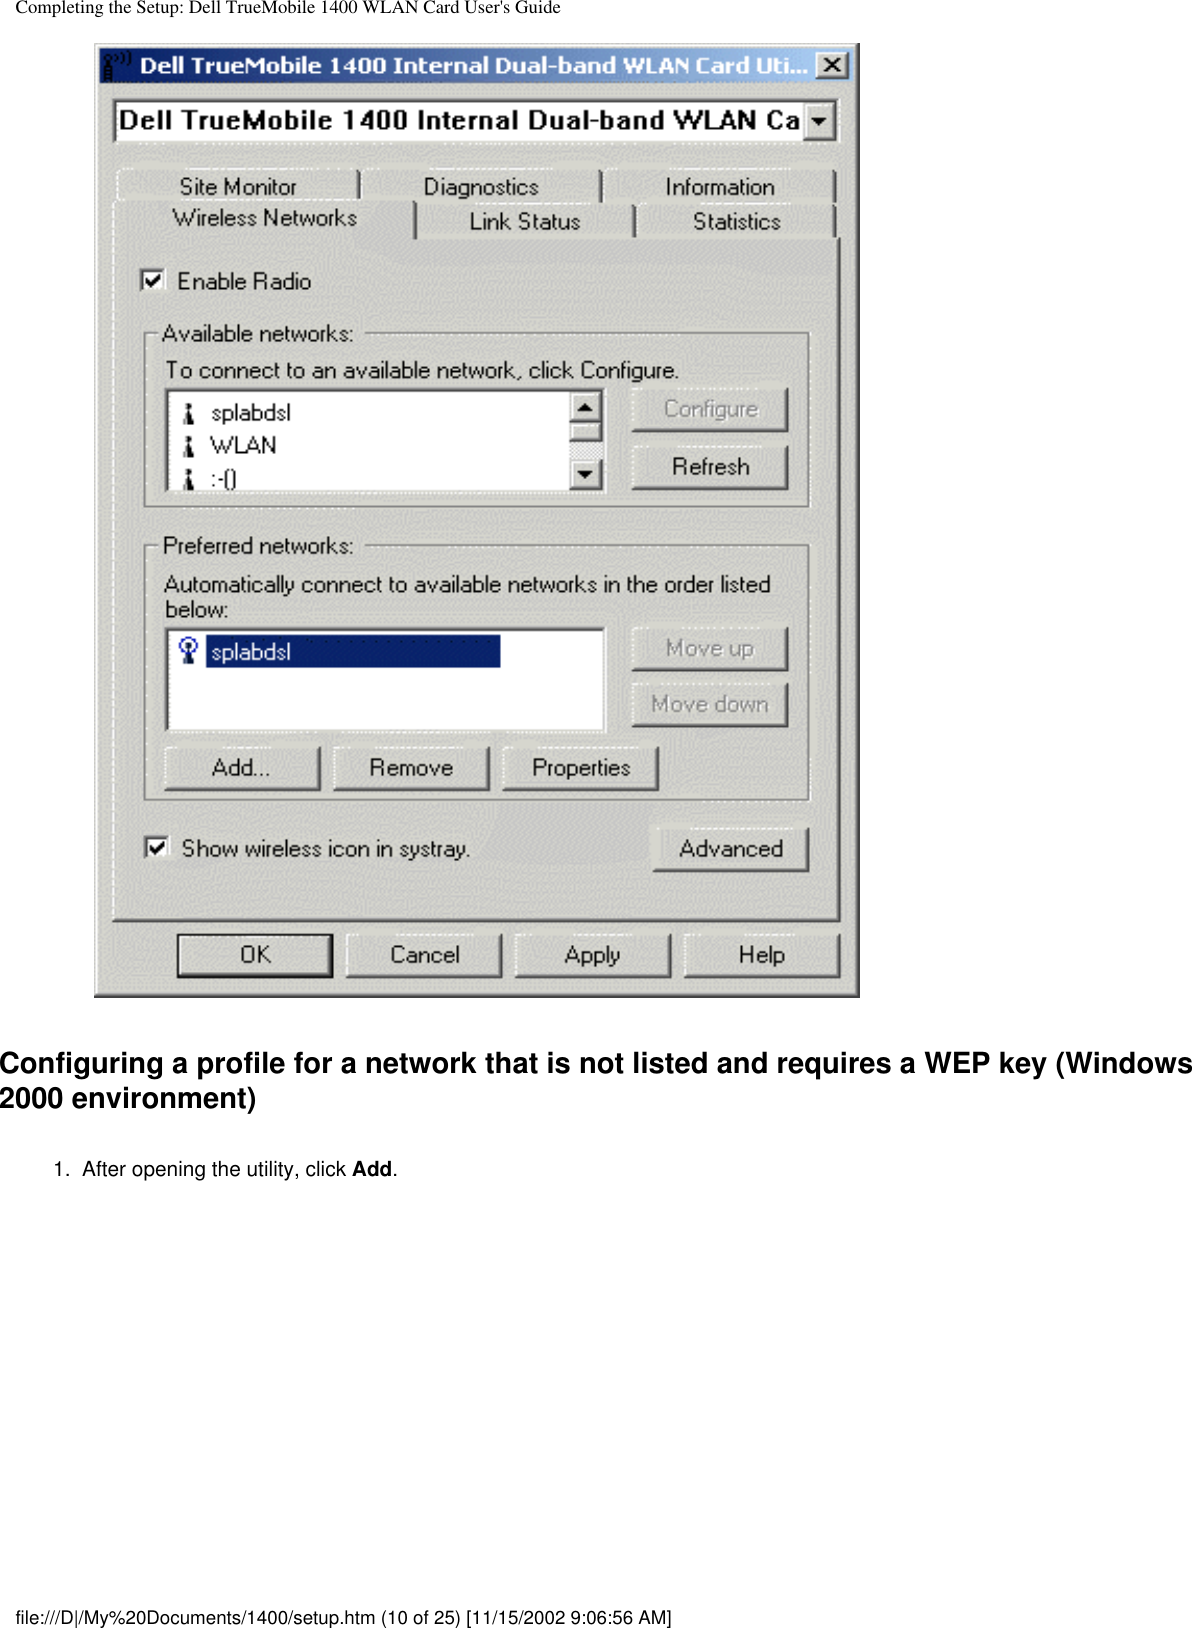 Completing the Setup: Dell TrueMobile 1400 WLAN Card User&apos;s GuideConfiguring a profile for a network that is not listed and requires a WEP key (Windows 2000 environment)1.  After opening the utility, click Add. file:///D|/My%20Documents/1400/setup.htm (10 of 25) [11/15/2002 9:06:56 AM]